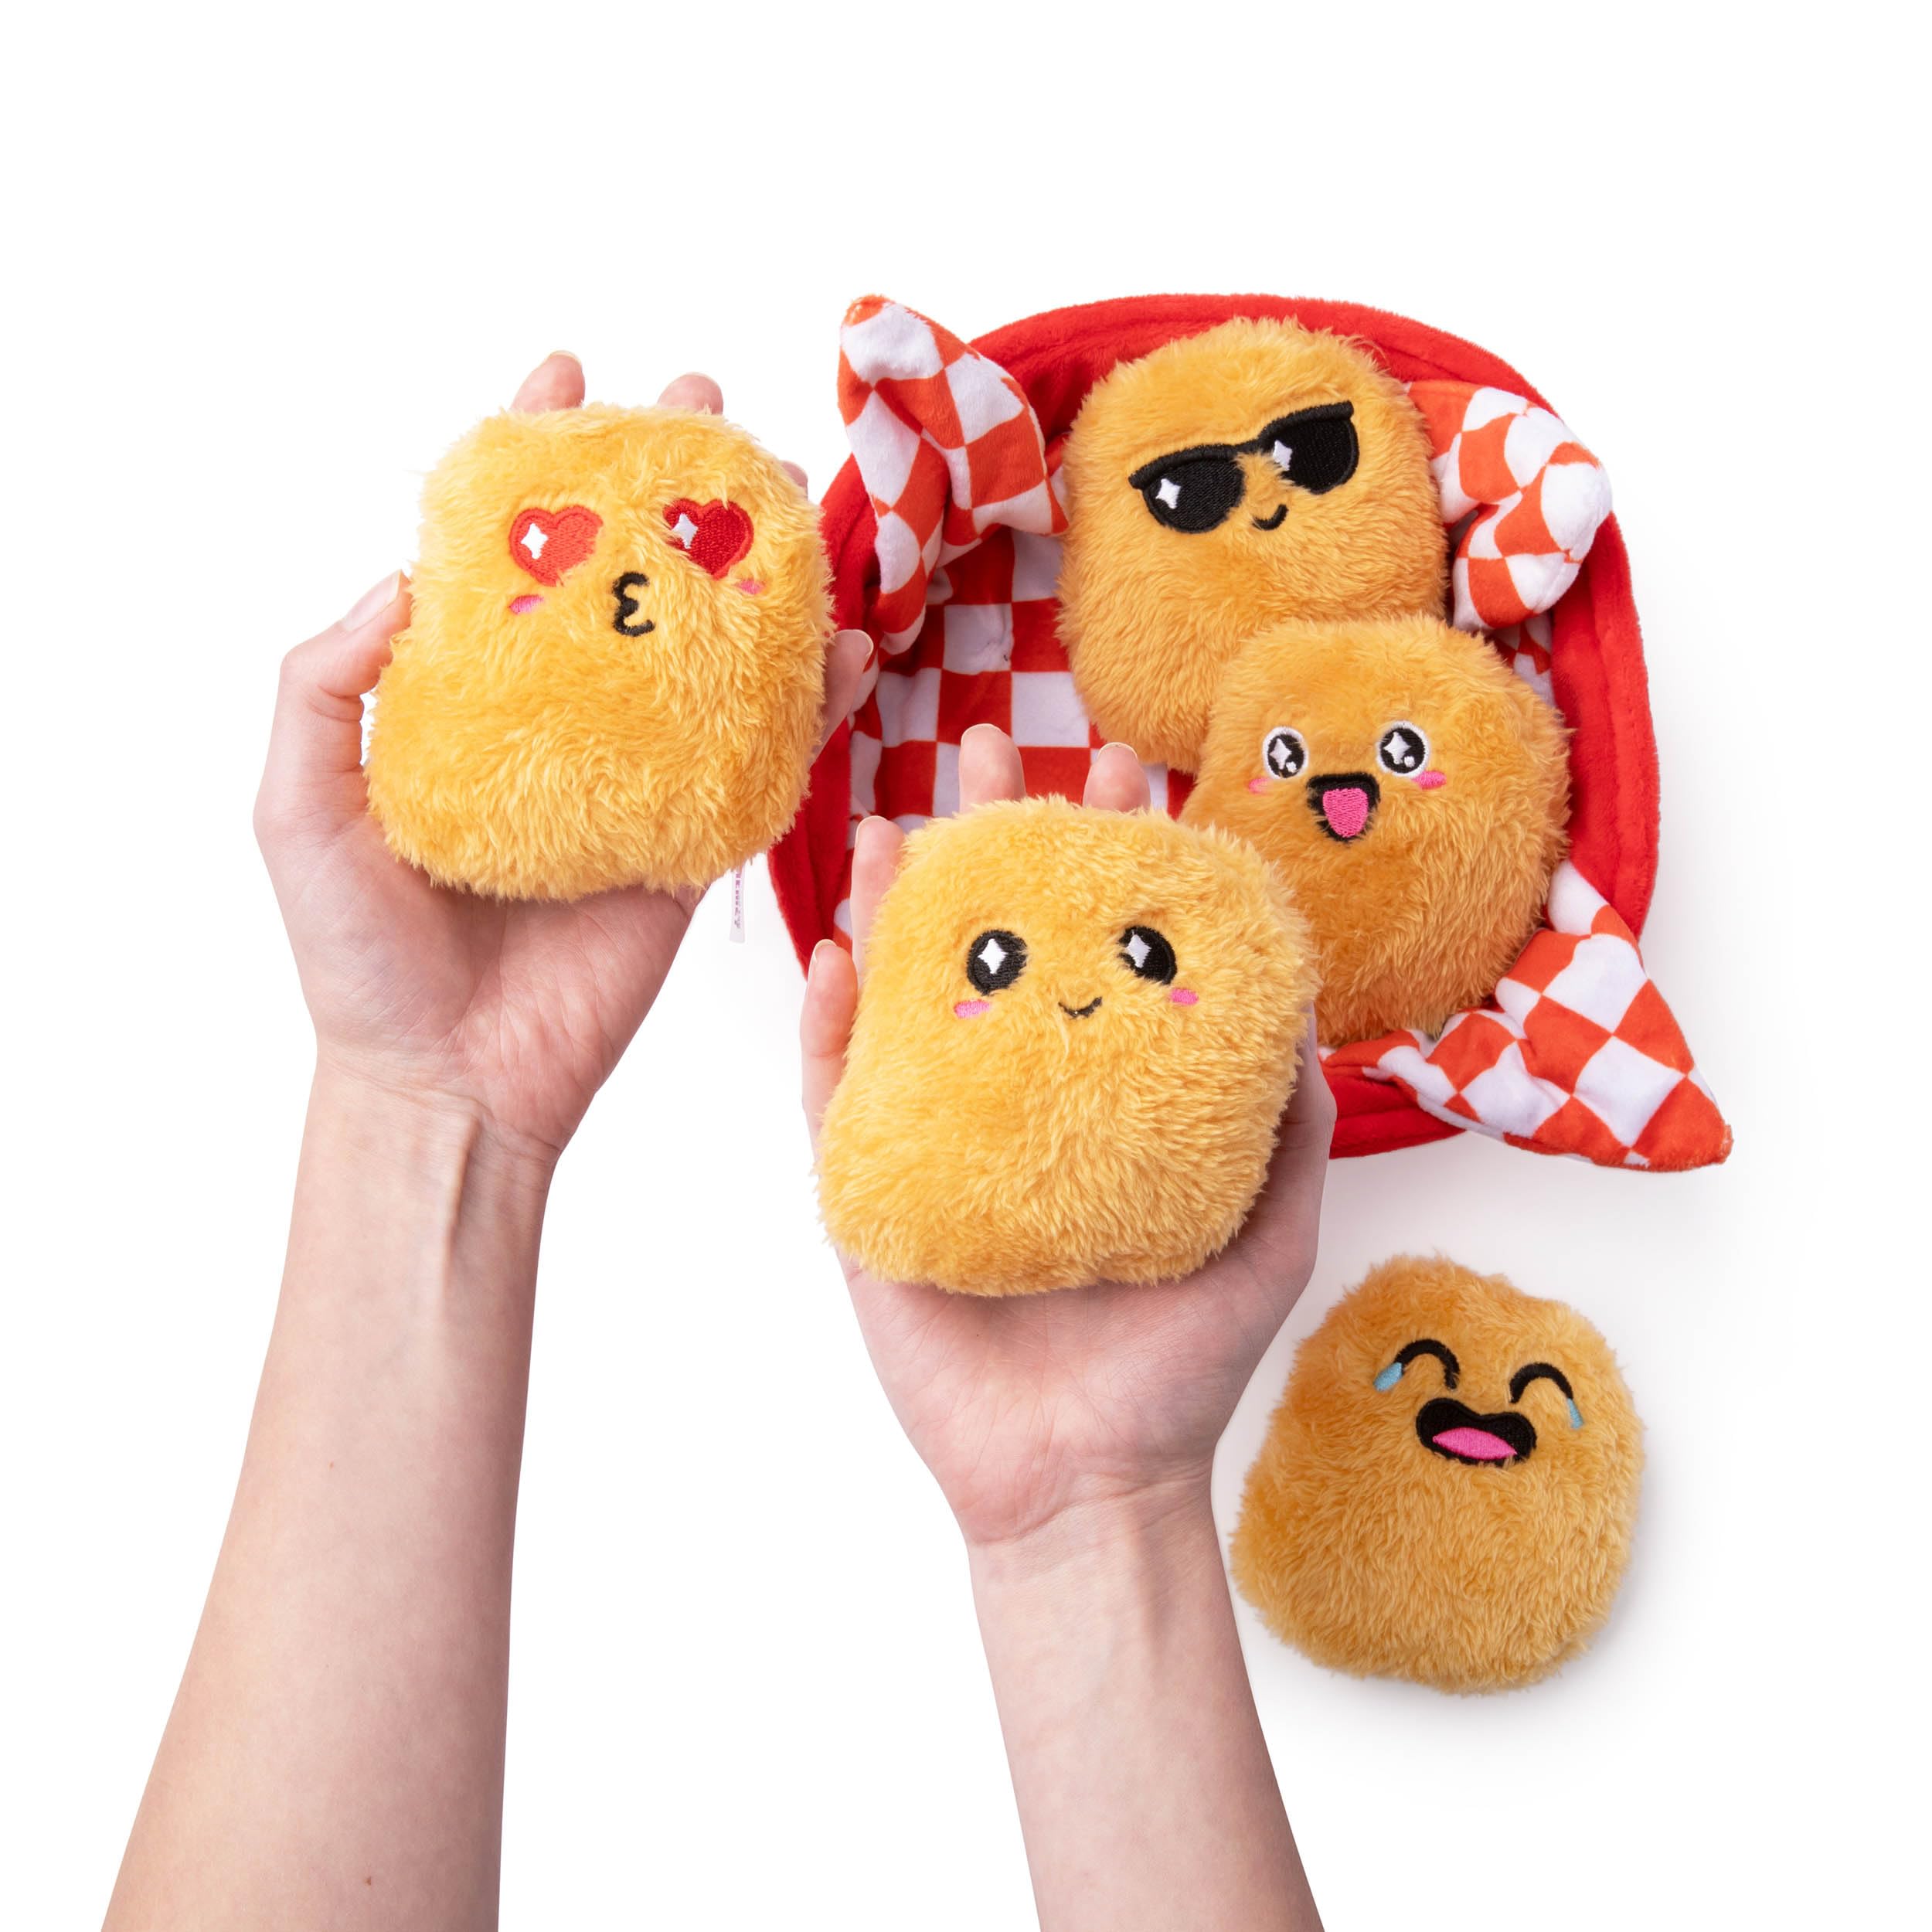 WHAT DO YOU MEME? Emotional Support Nuggets - Plush Nuggets Stuffed Animal by Emotional Support Plushies Medium